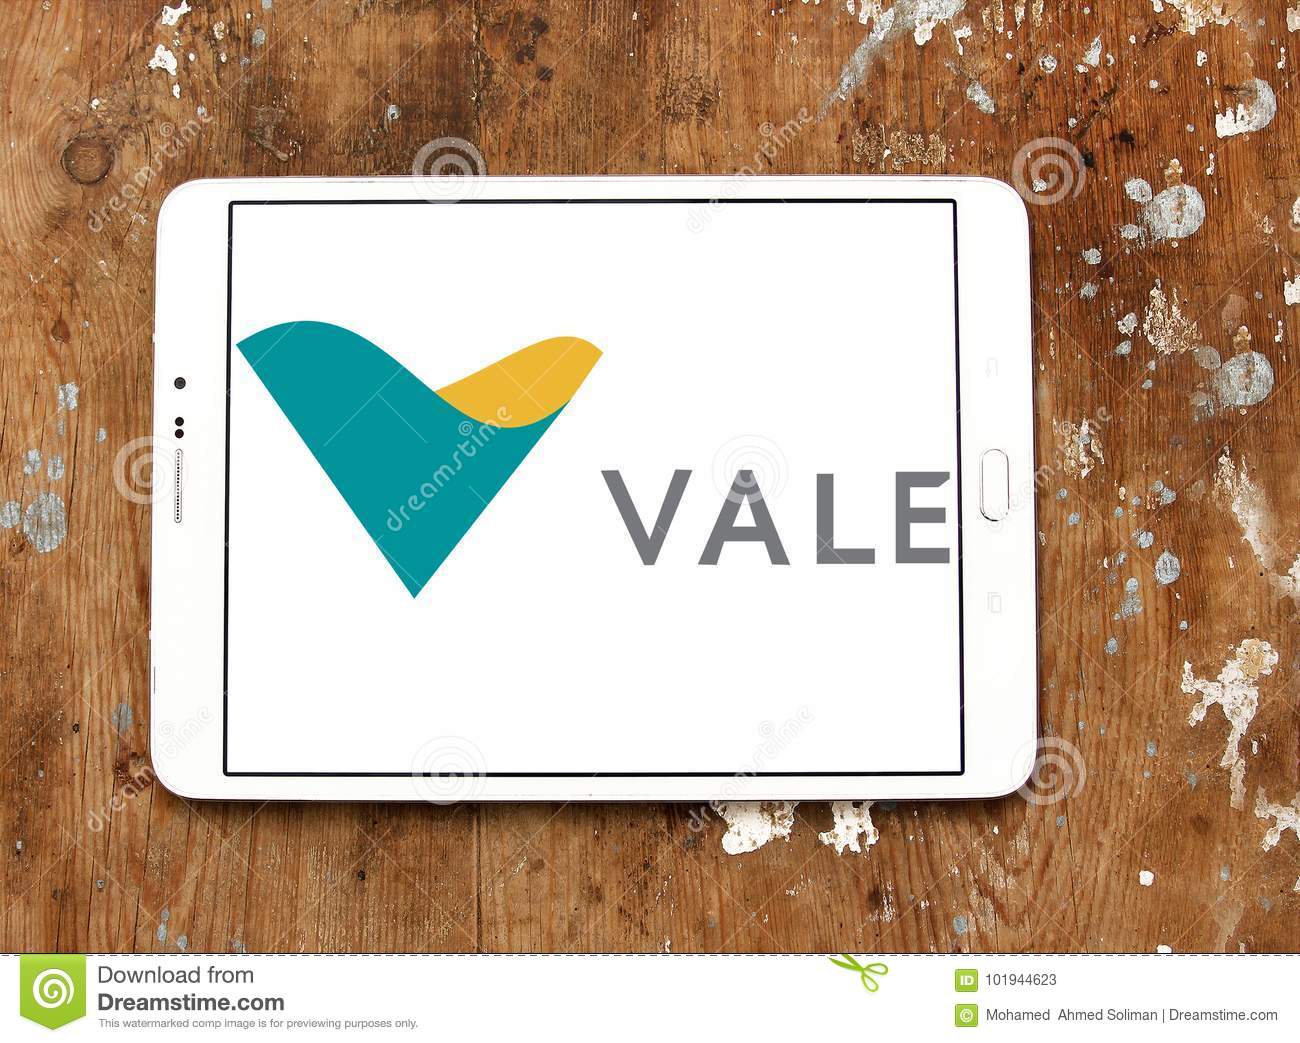 logo-vale-company-samsung-tablet-wooden-background-brazilian-multinational-corporation-engaged-metals-mining-one-101944623